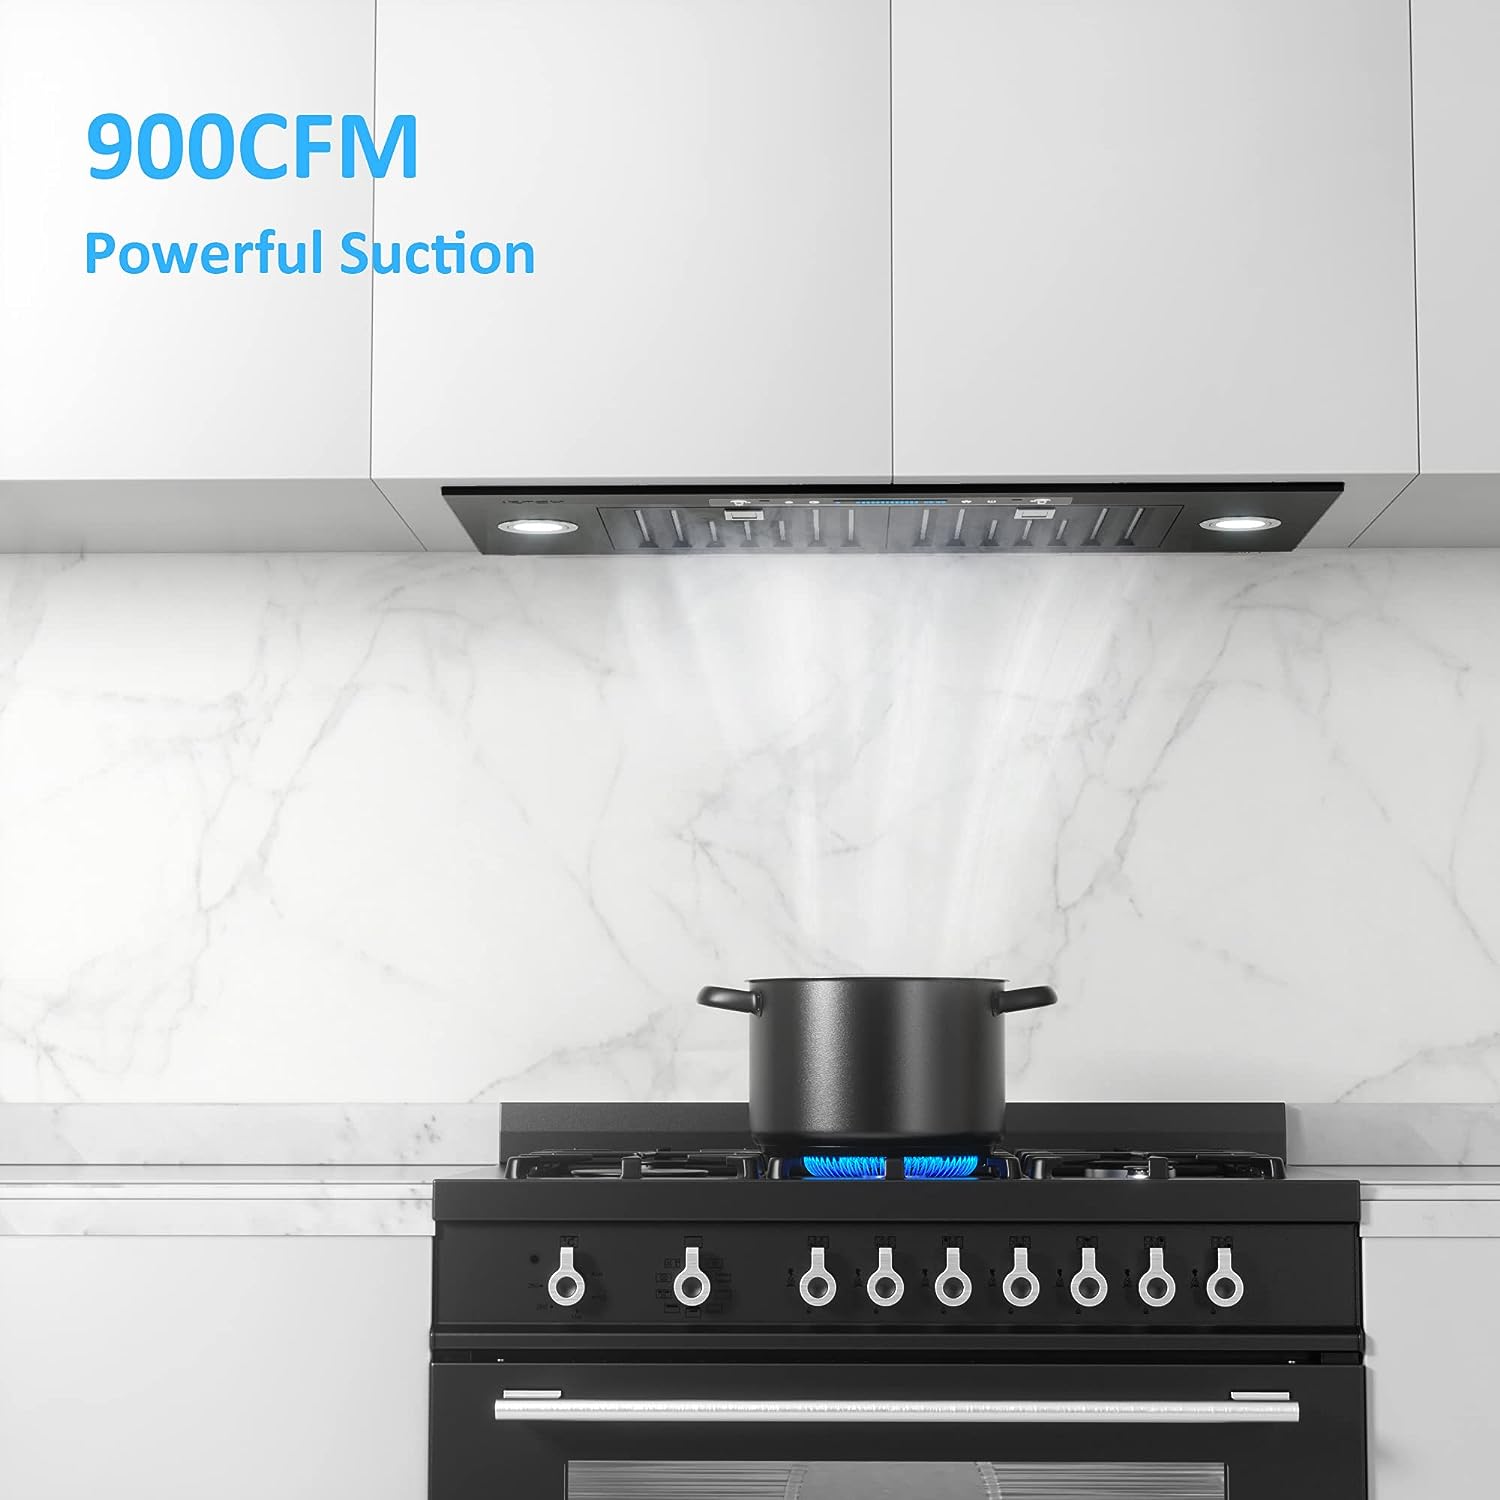 IKTCH 36 in. 900 CFM Ducted Under Cabinet Range Hood in Stainless Steel with LED Light, Black